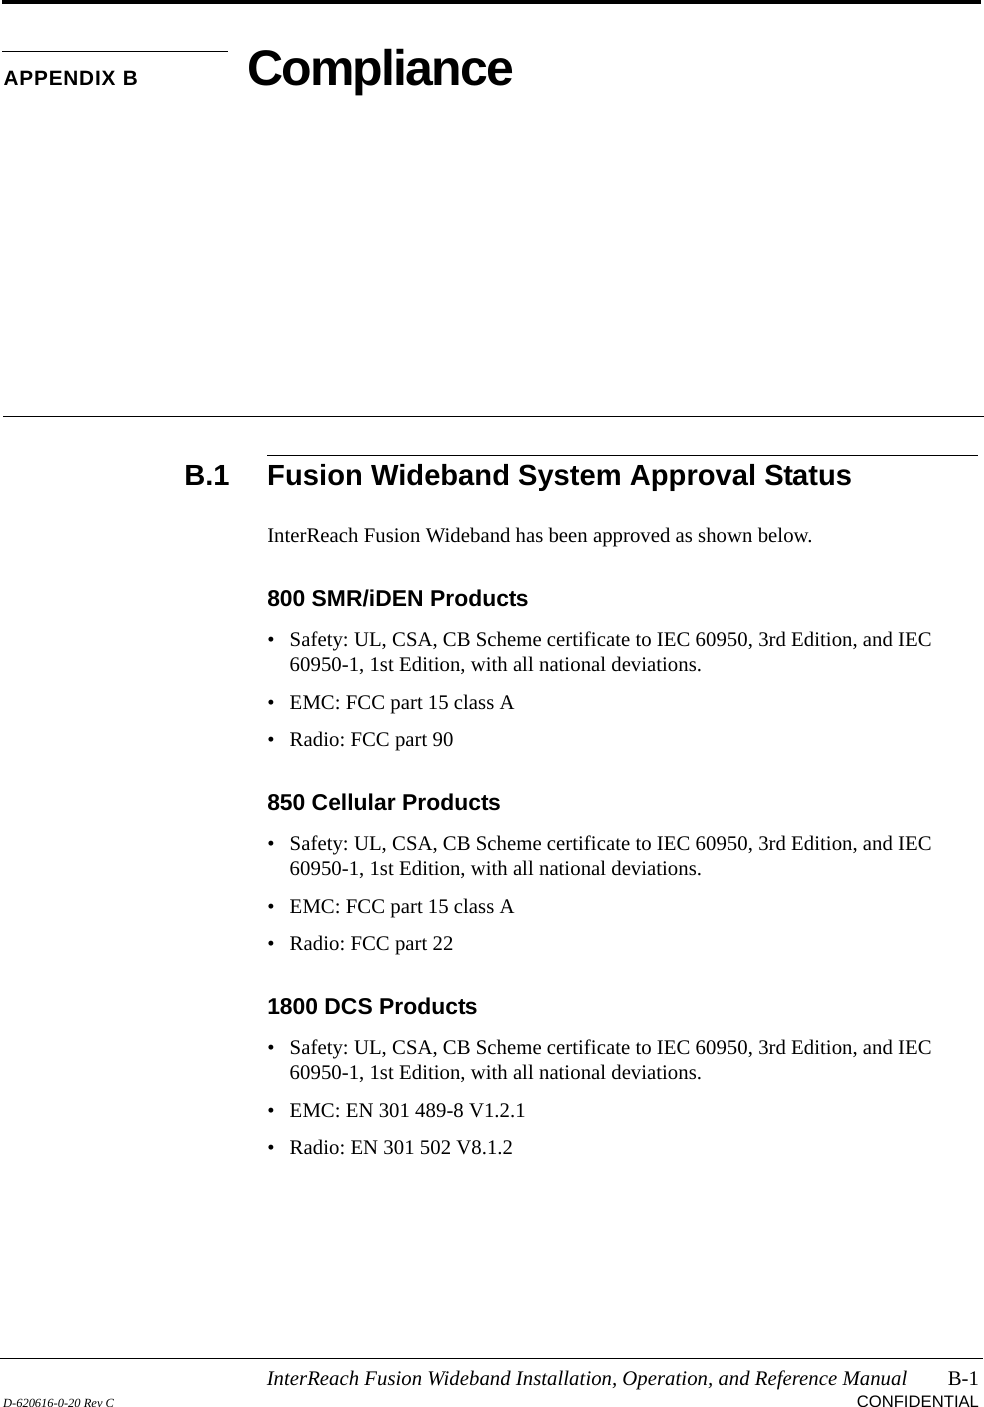 InterReach Fusion Wideband Installation, Operation, and Reference Manual B-1D-620616-0-20 Rev C CONFIDENTIALAPPENDIX B ComplianceB.1 Fusion Wideband System Approval StatusInterReach Fusion Wideband has been approved as shown below.800 SMR/iDEN Products• Safety: UL, CSA, CB Scheme certificate to IEC 60950, 3rd Edition, and IEC 60950-1, 1st Edition, with all national deviations.• EMC: FCC part 15 class A• Radio: FCC part 90850 Cellular Products• Safety: UL, CSA, CB Scheme certificate to IEC 60950, 3rd Edition, and IEC 60950-1, 1st Edition, with all national deviations.• EMC: FCC part 15 class A• Radio: FCC part 221800 DCS Products• Safety: UL, CSA, CB Scheme certificate to IEC 60950, 3rd Edition, and IEC 60950-1, 1st Edition, with all national deviations.• EMC: EN 301 489-8 V1.2.1• Radio: EN 301 502 V8.1.2